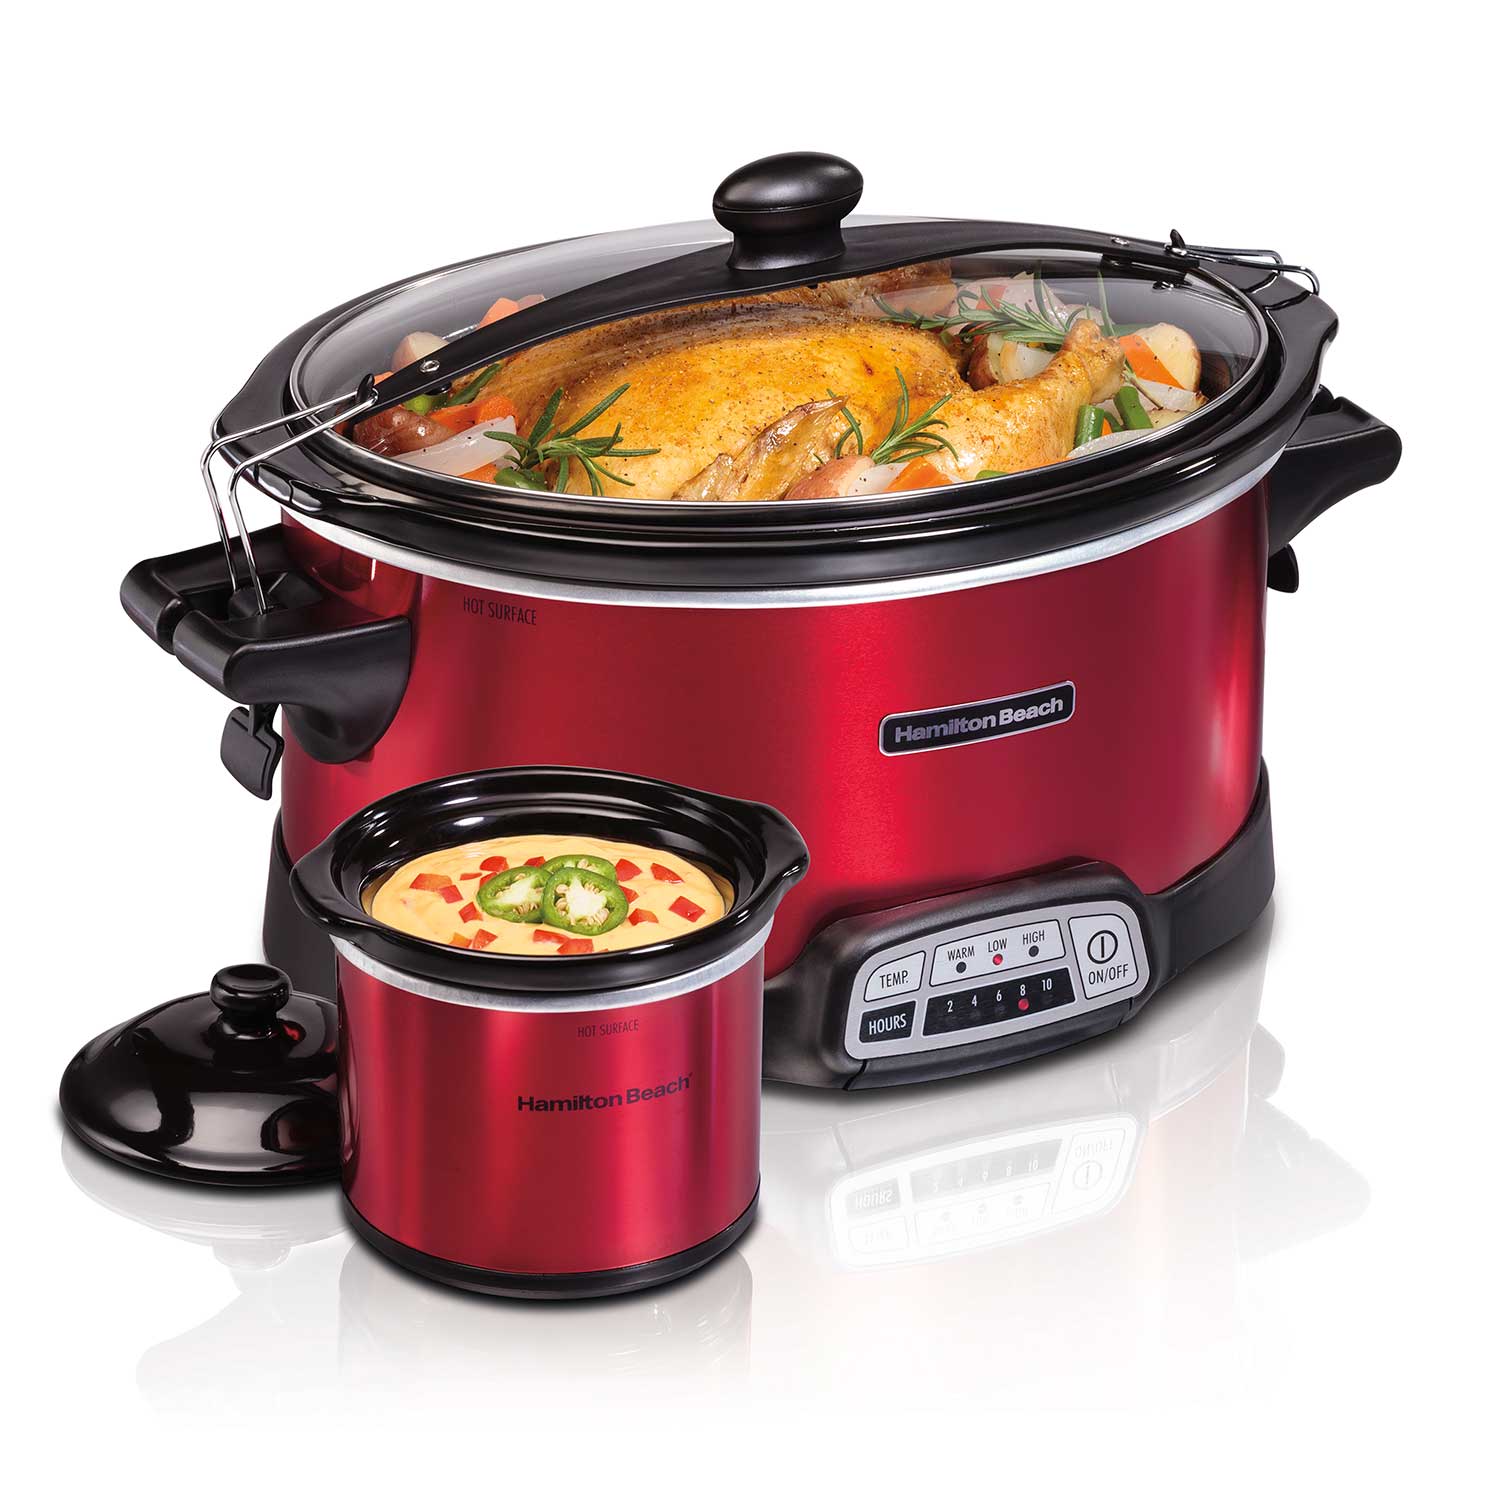 Stay or Go® Programmable Slow Cooker with Party Dipper, Red (33478FG)